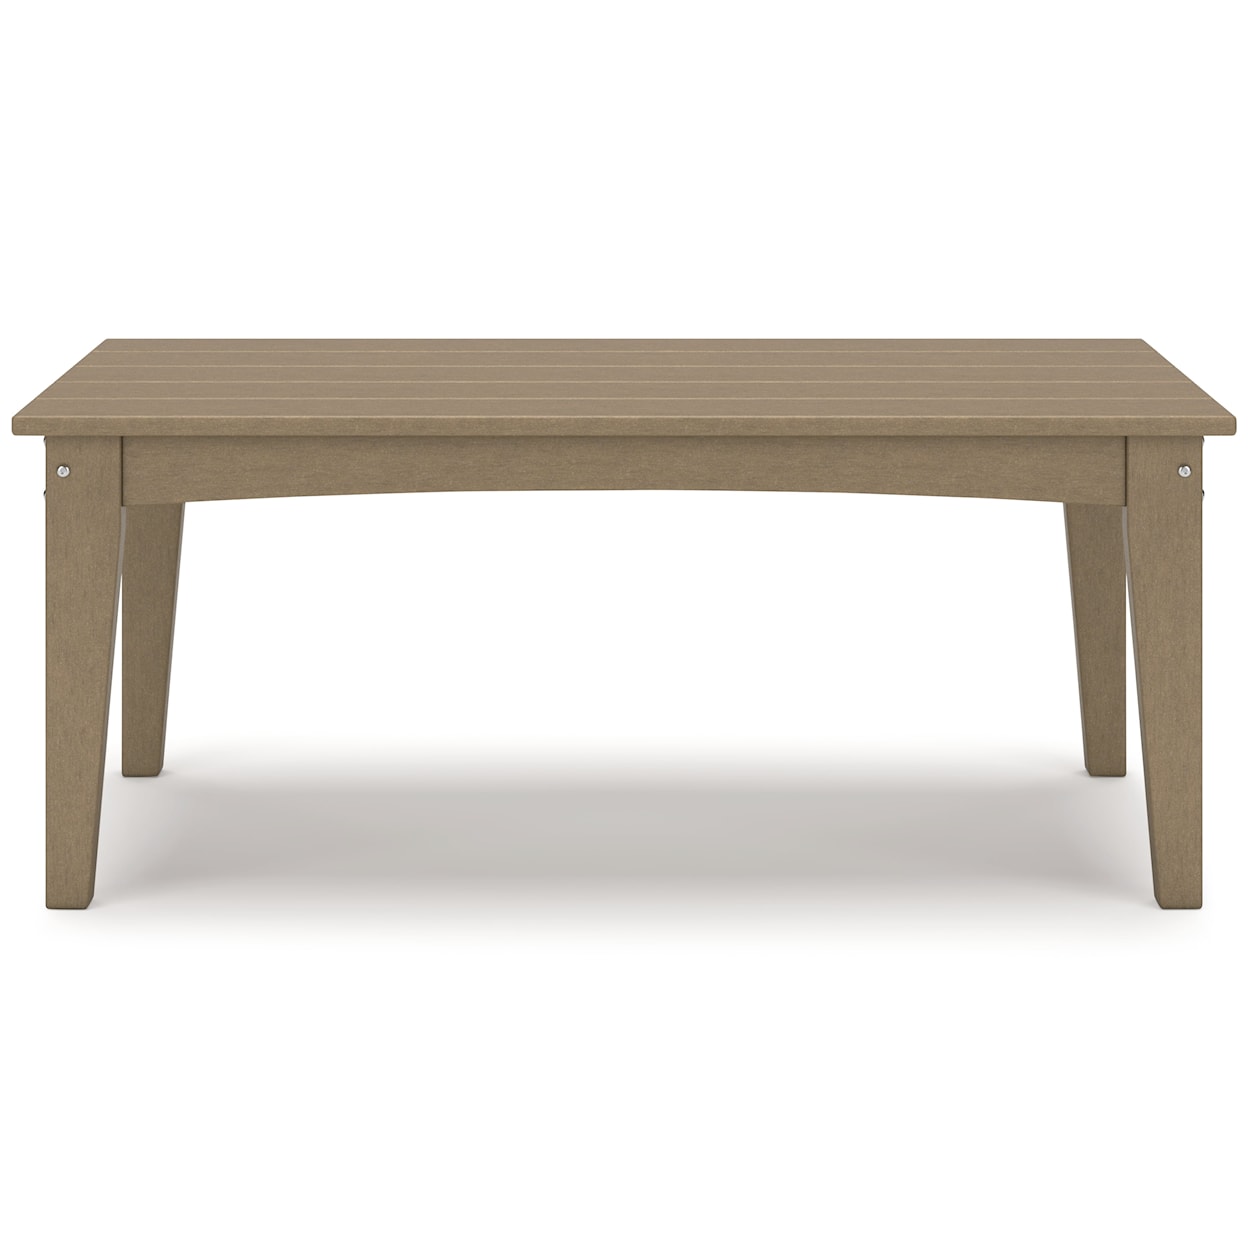 Signature Hyland wave Outdoor Coffee Table